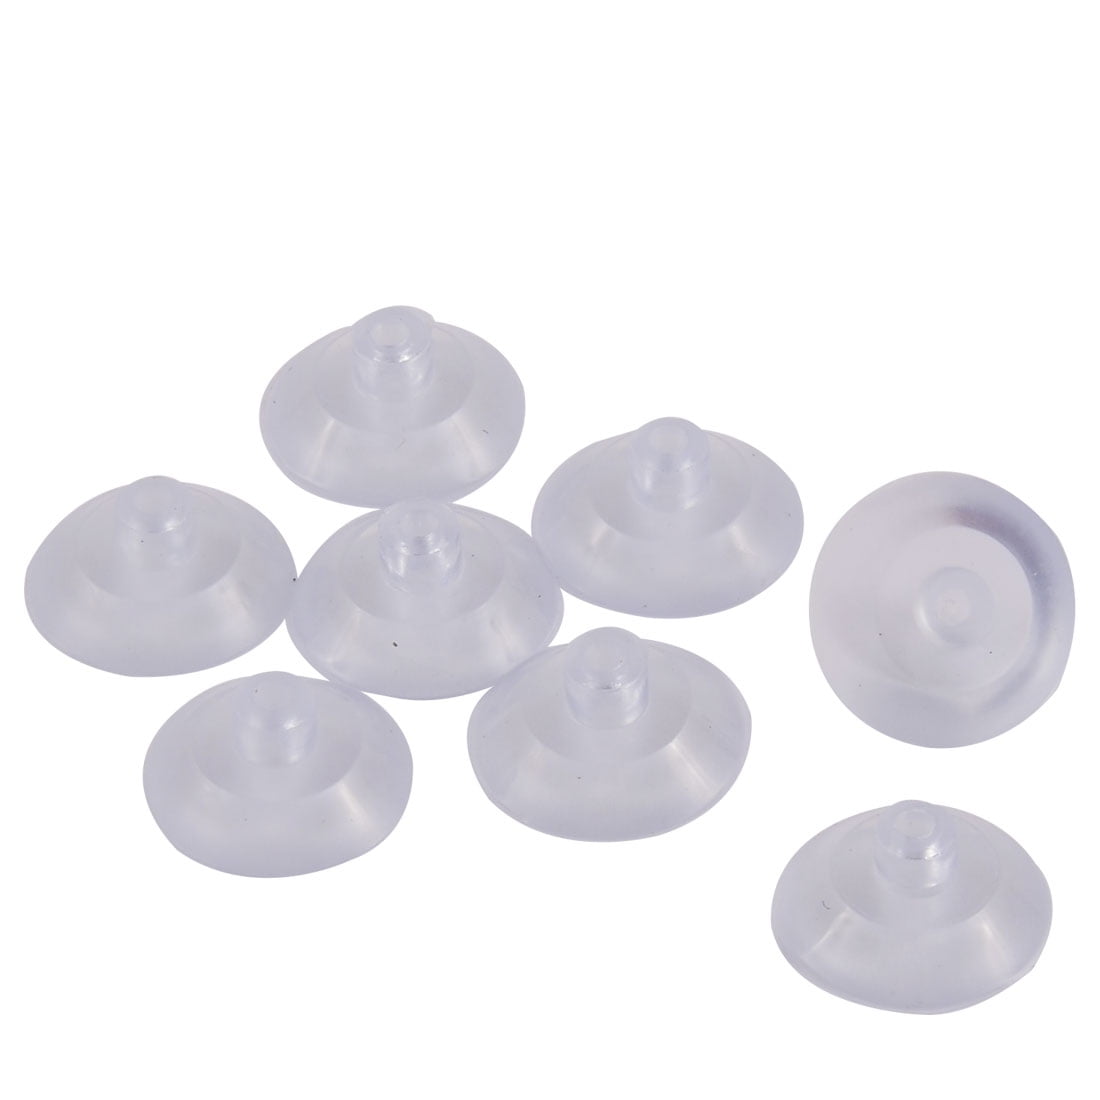 Details about   Double Sided Suction Cups Clear Plastic Rubber Window Suckers Pads US Stock New 